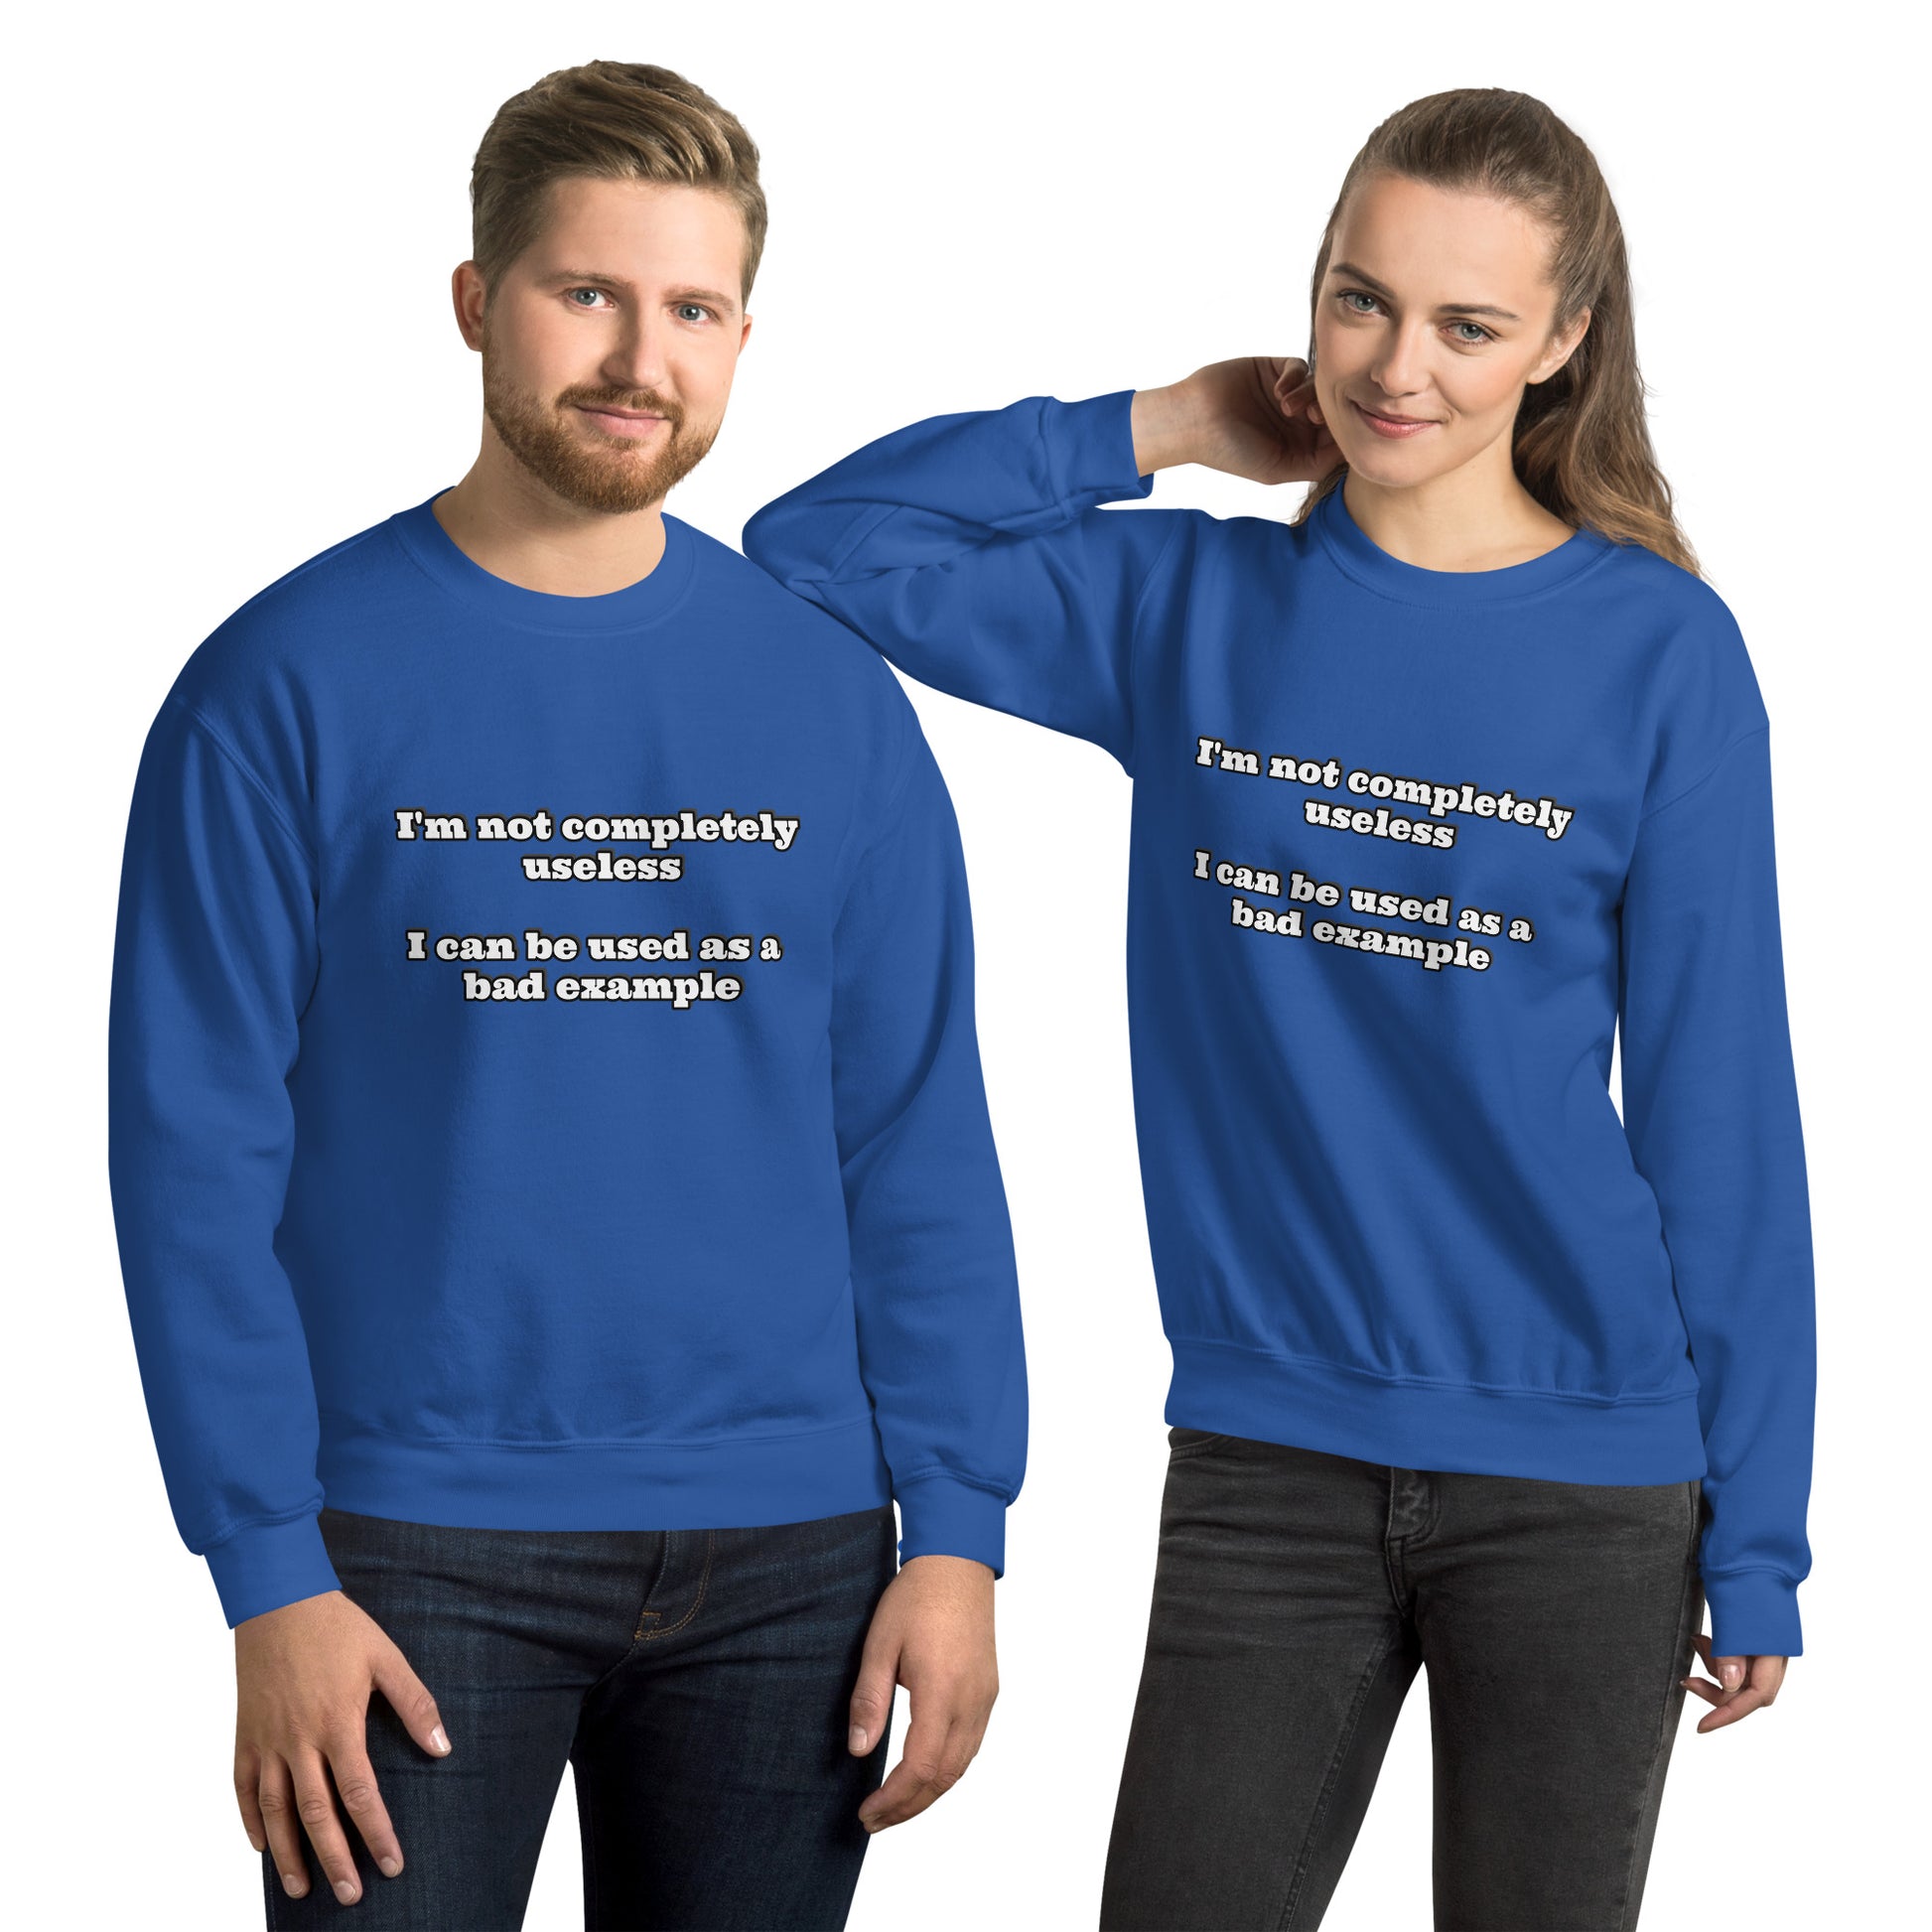 Man and women with royal blue sweatshirt with text “I'm not completely useless I can be used as a bad example”